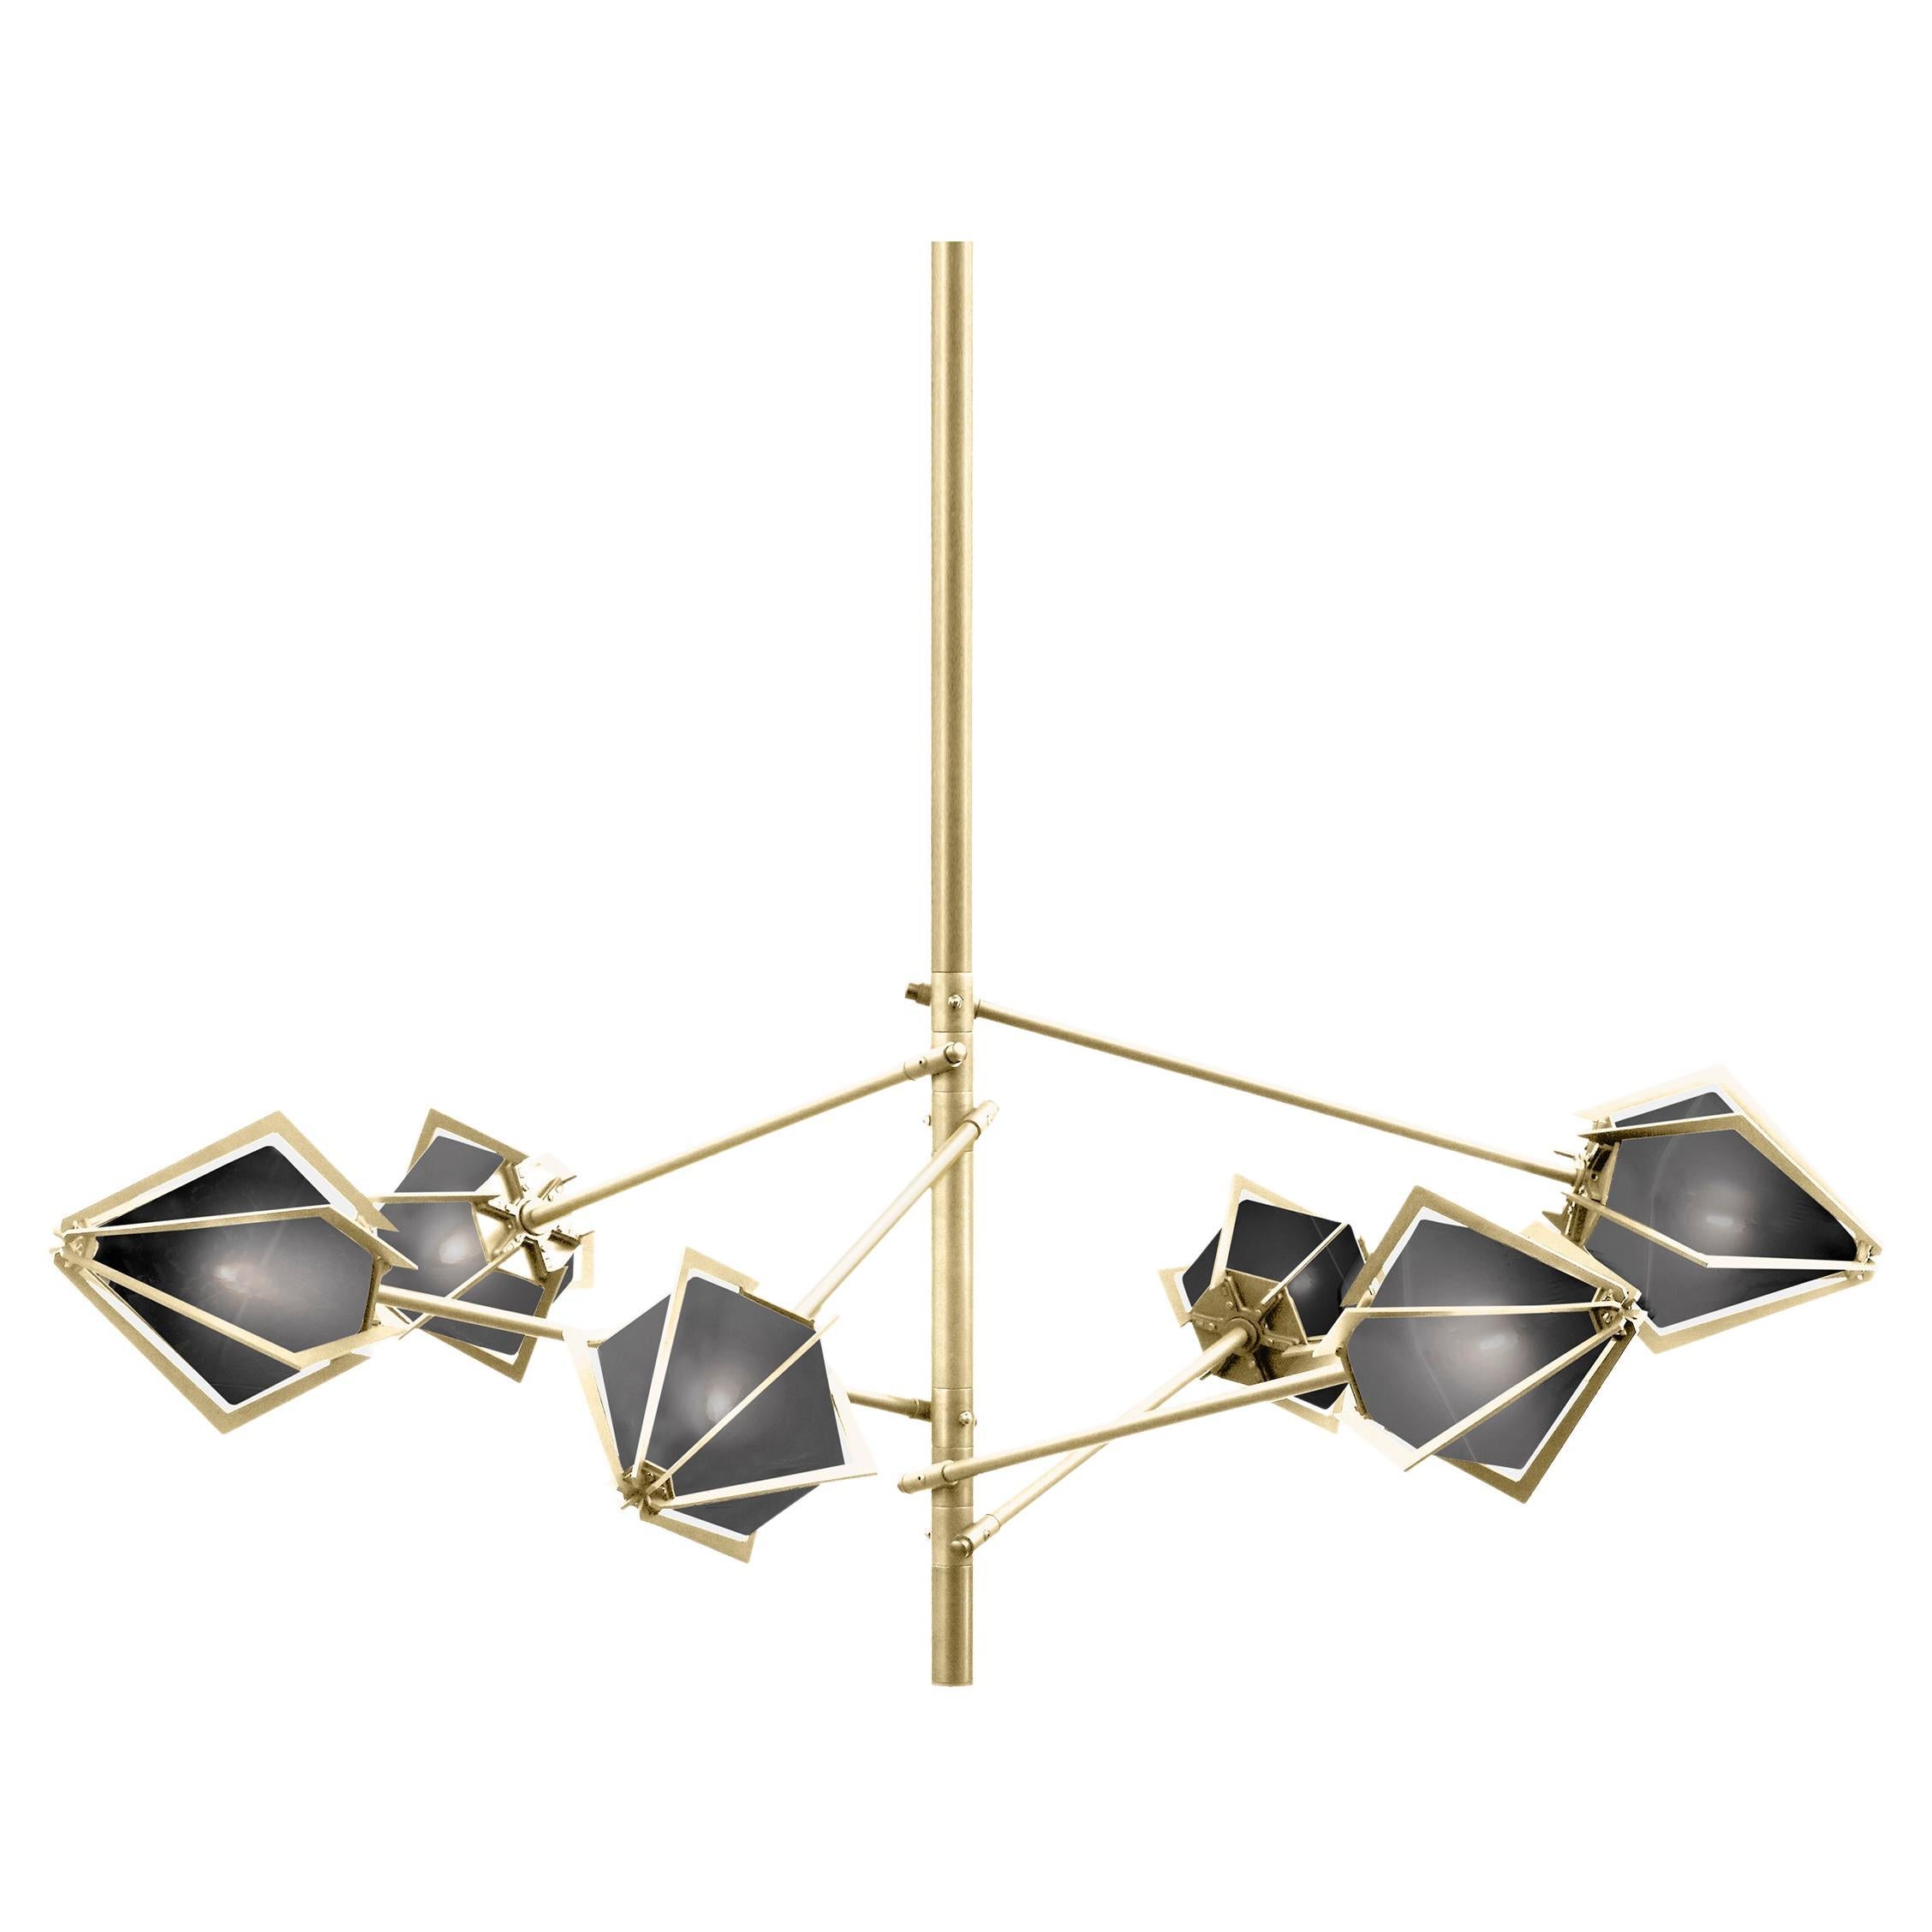 Harlow Spoke Chandelier Small in Satin Brass and Smoked Gray Glass For Sale